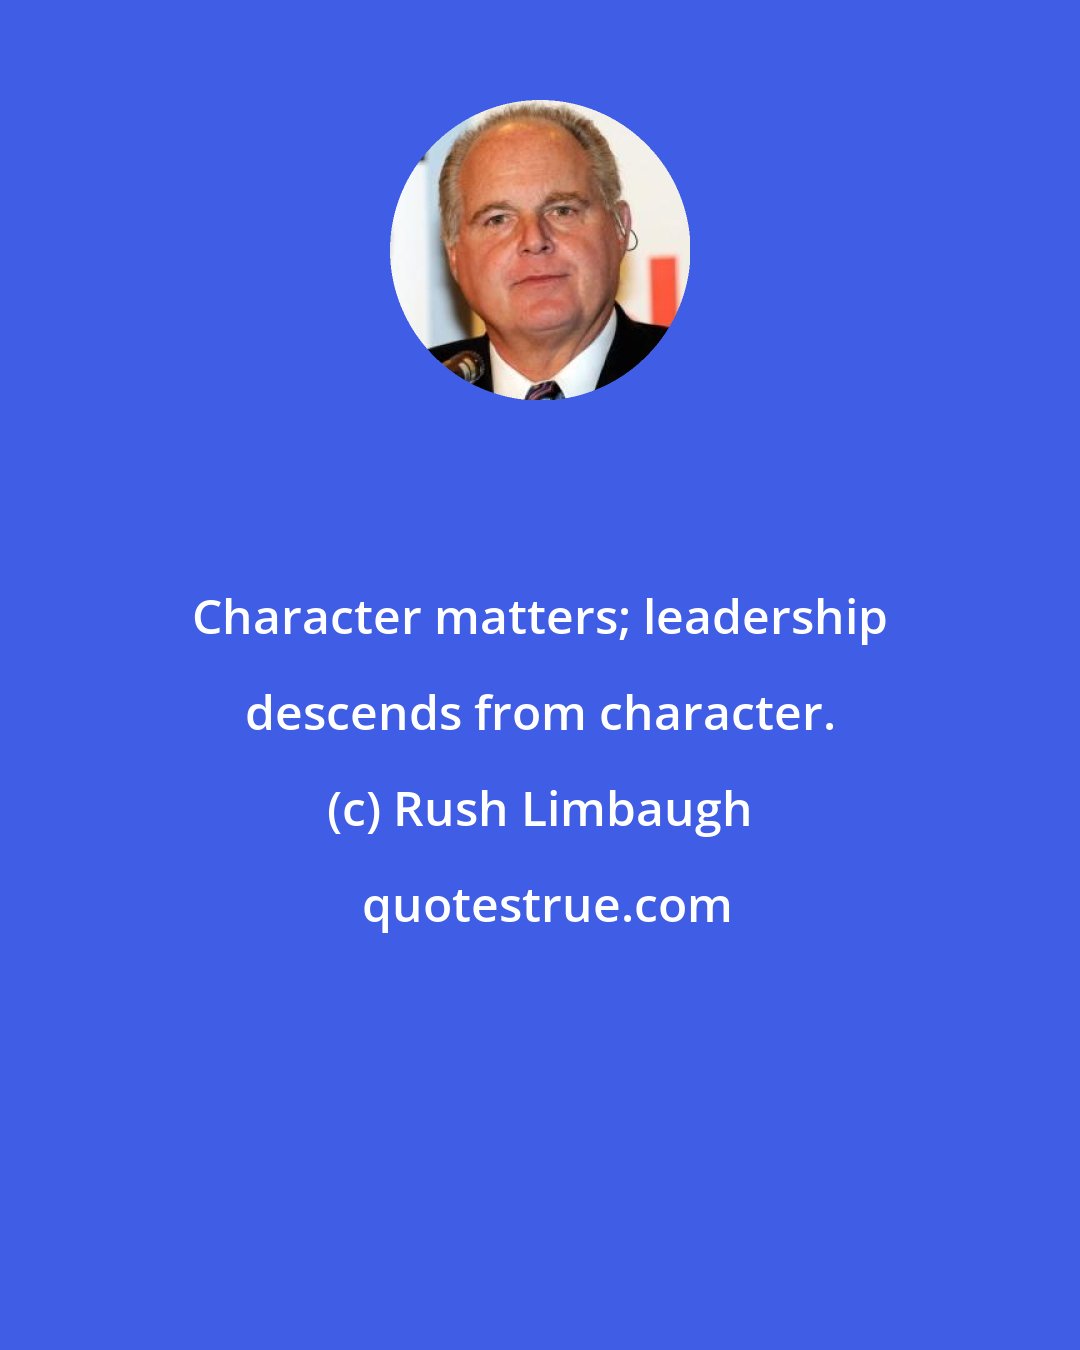 Rush Limbaugh: Character matters; leadership descends from character.